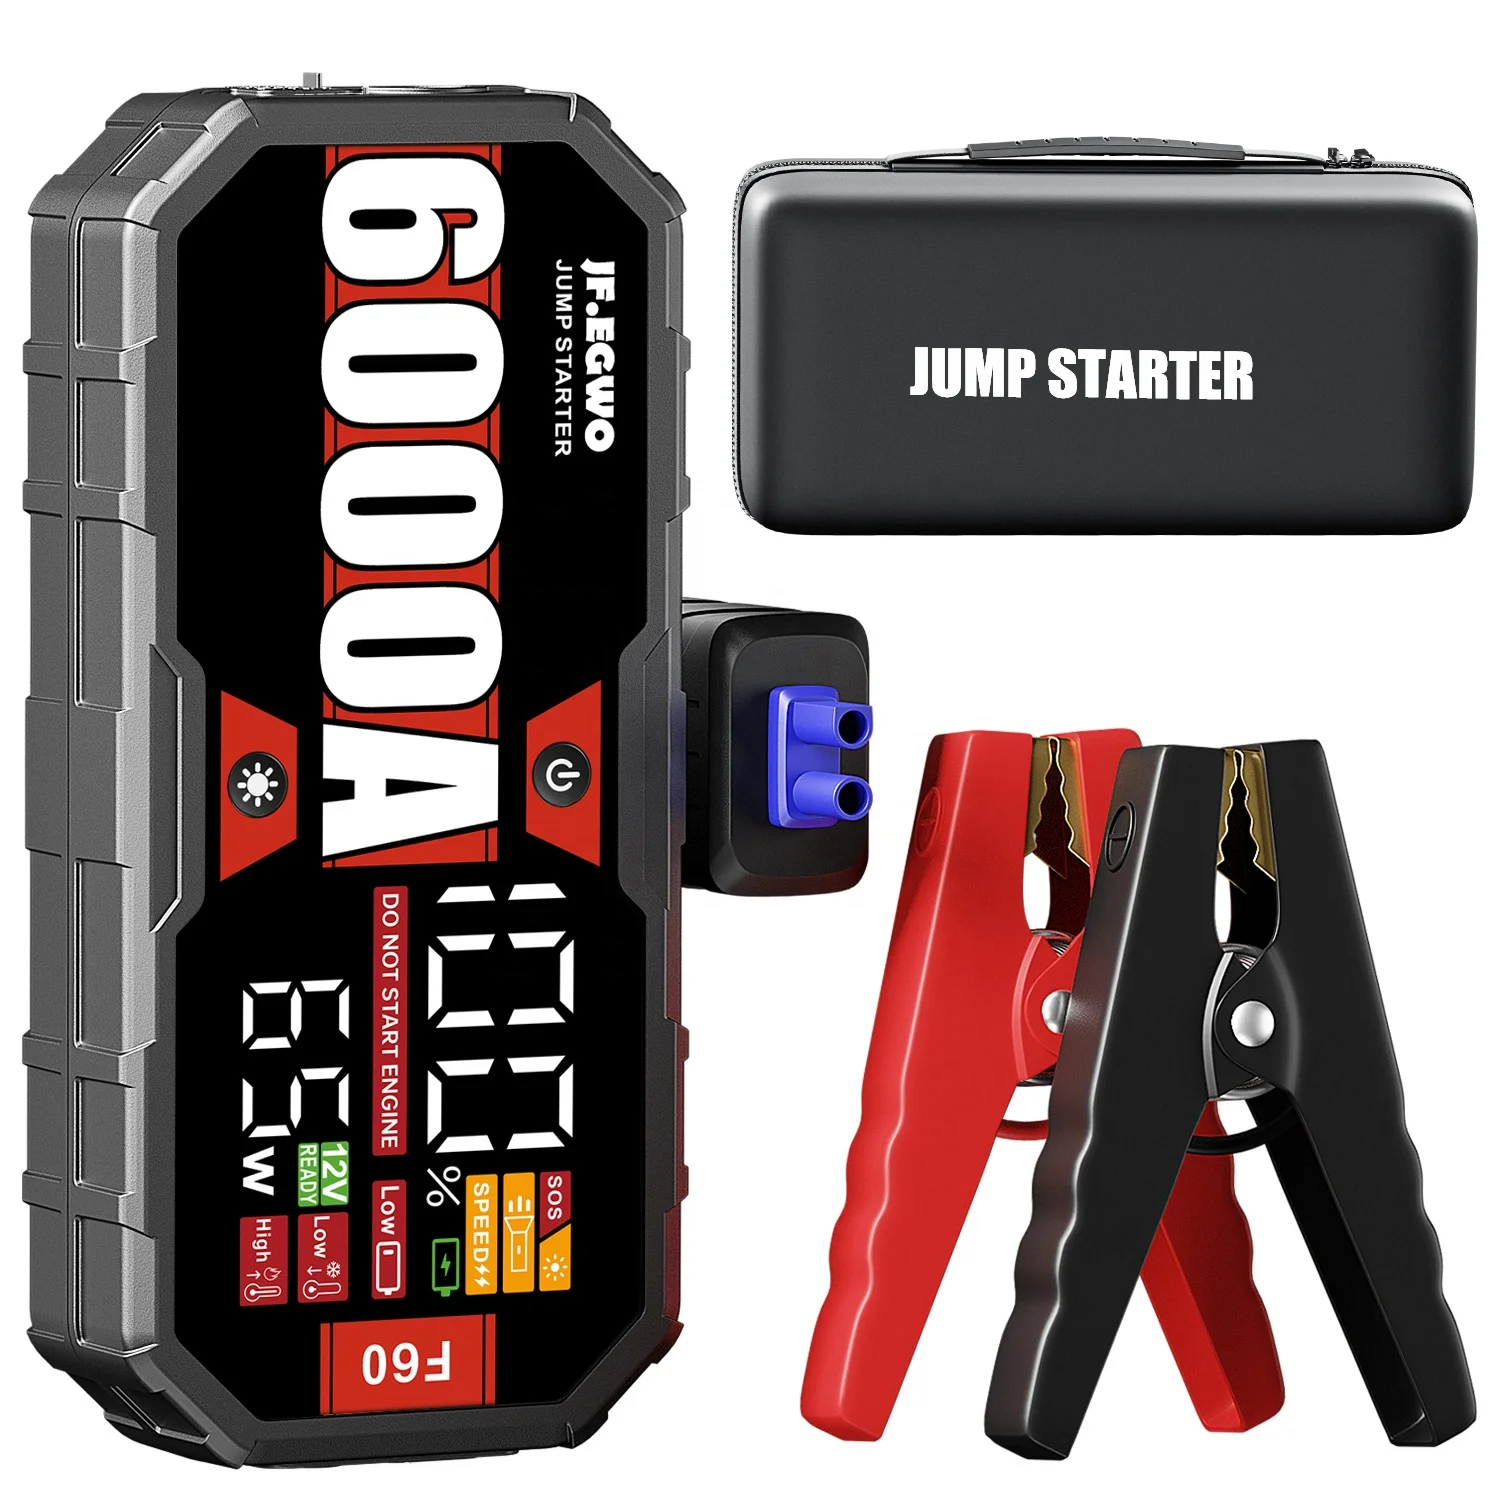 

Emergency Power Supply Booster Portable Power Bank Battery 65W Fast charger 230W outport 12V Car Battery Jump Starter